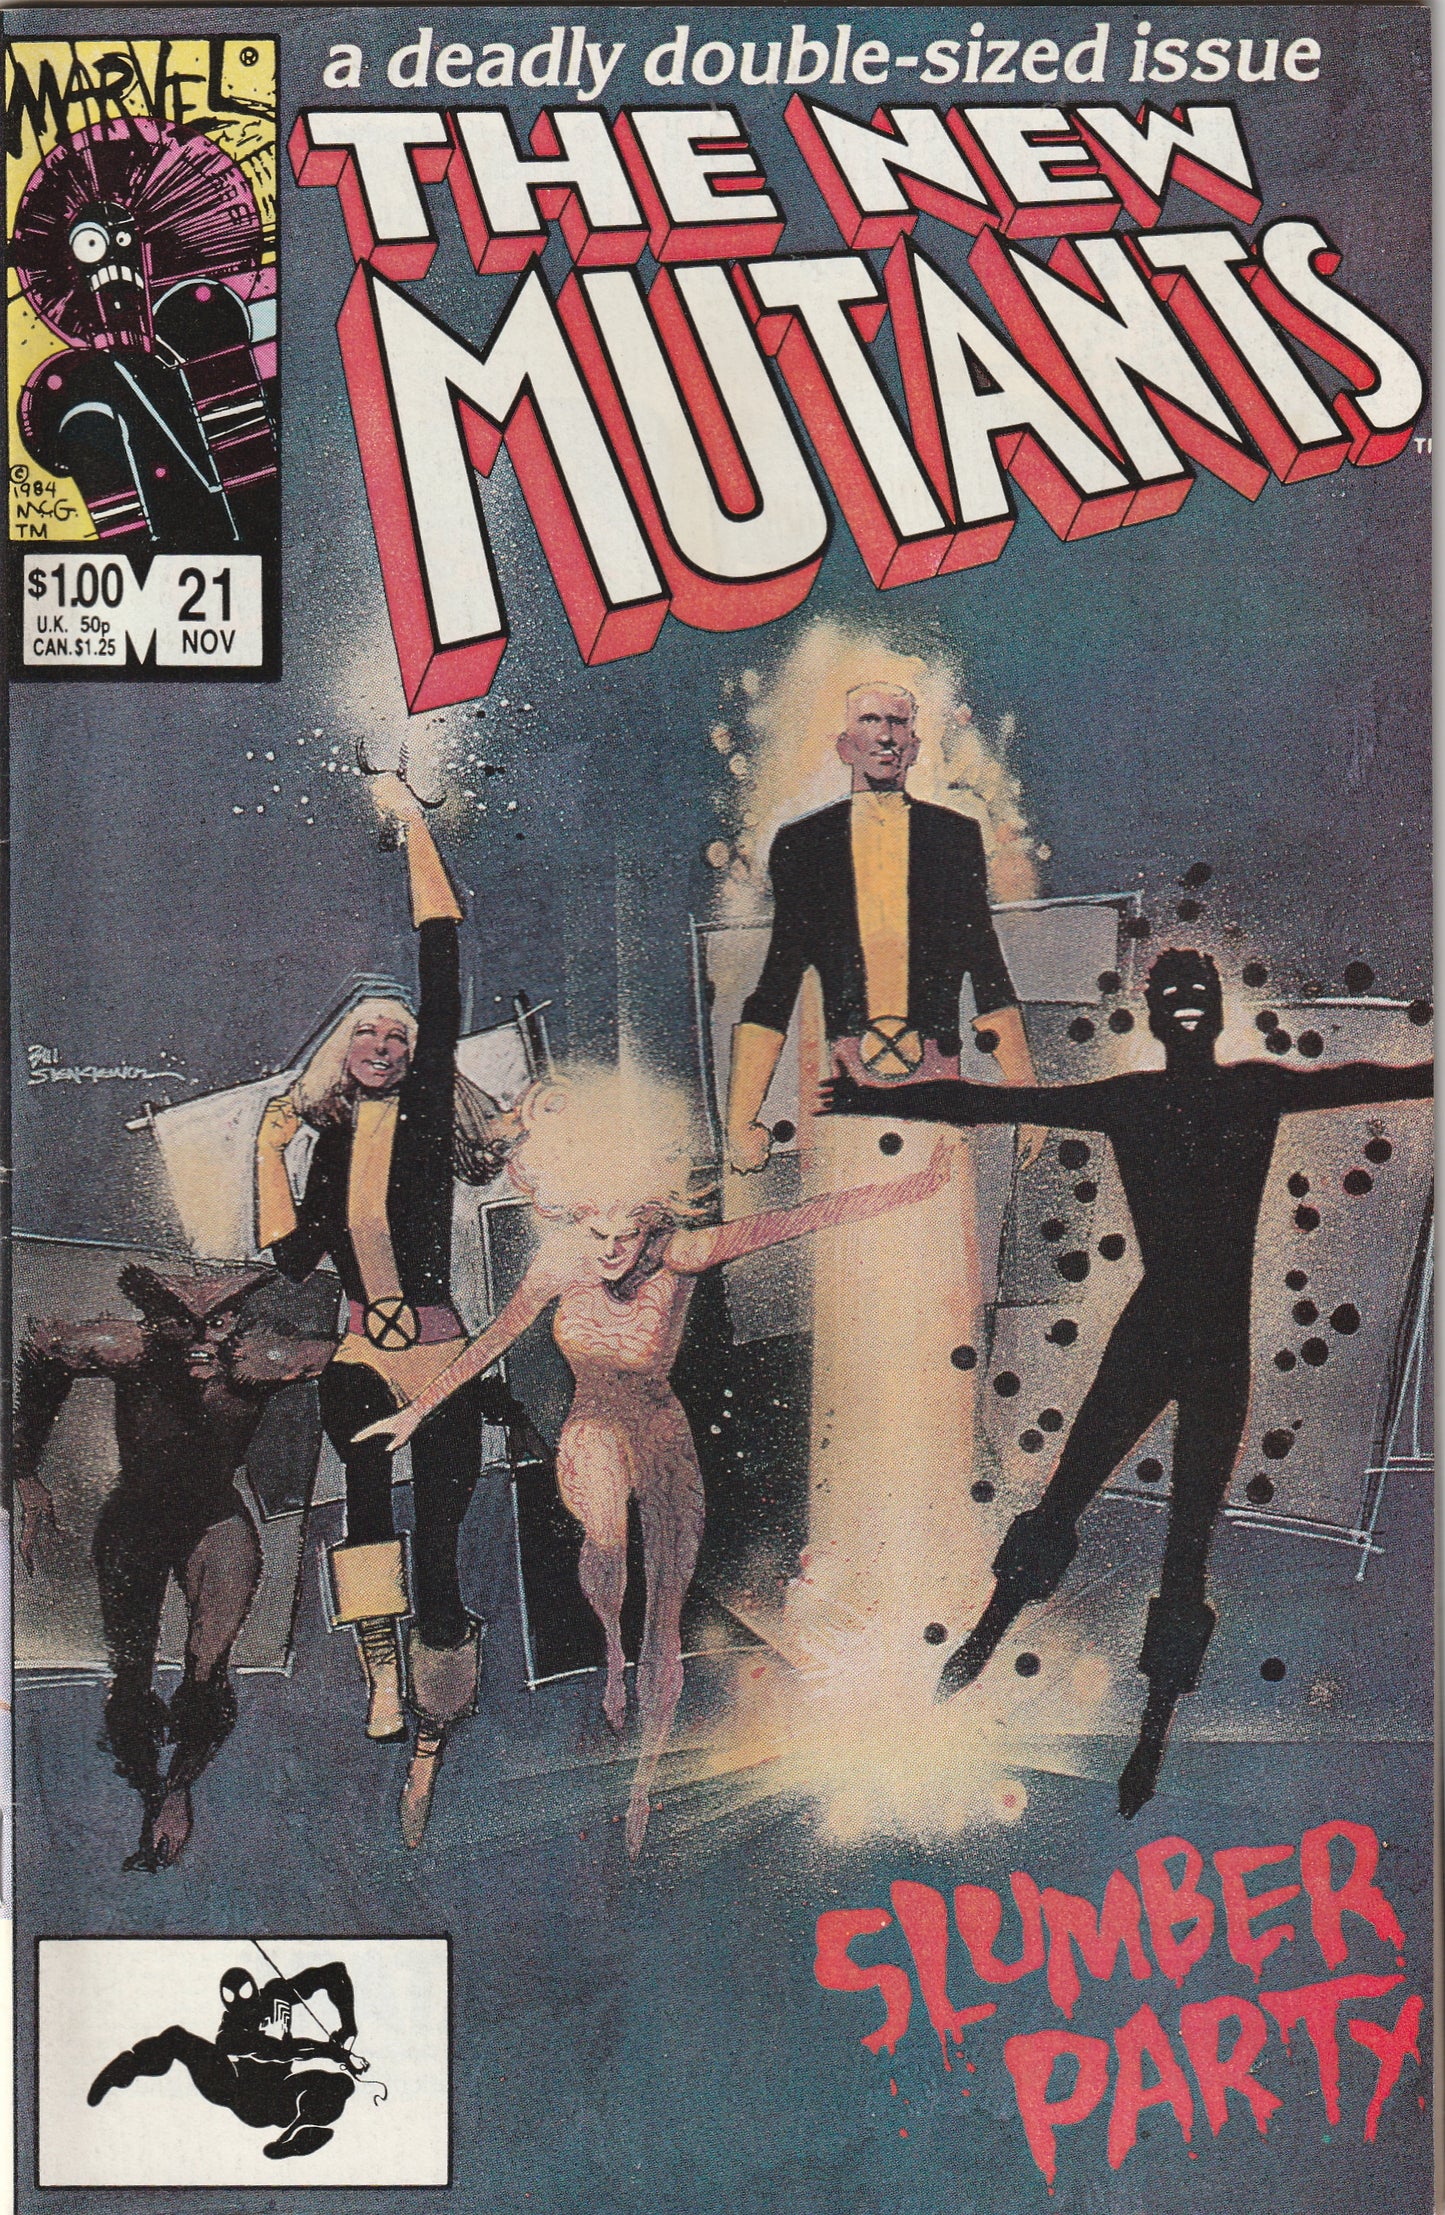 New Mutants #21 (1984) - Double sized issue